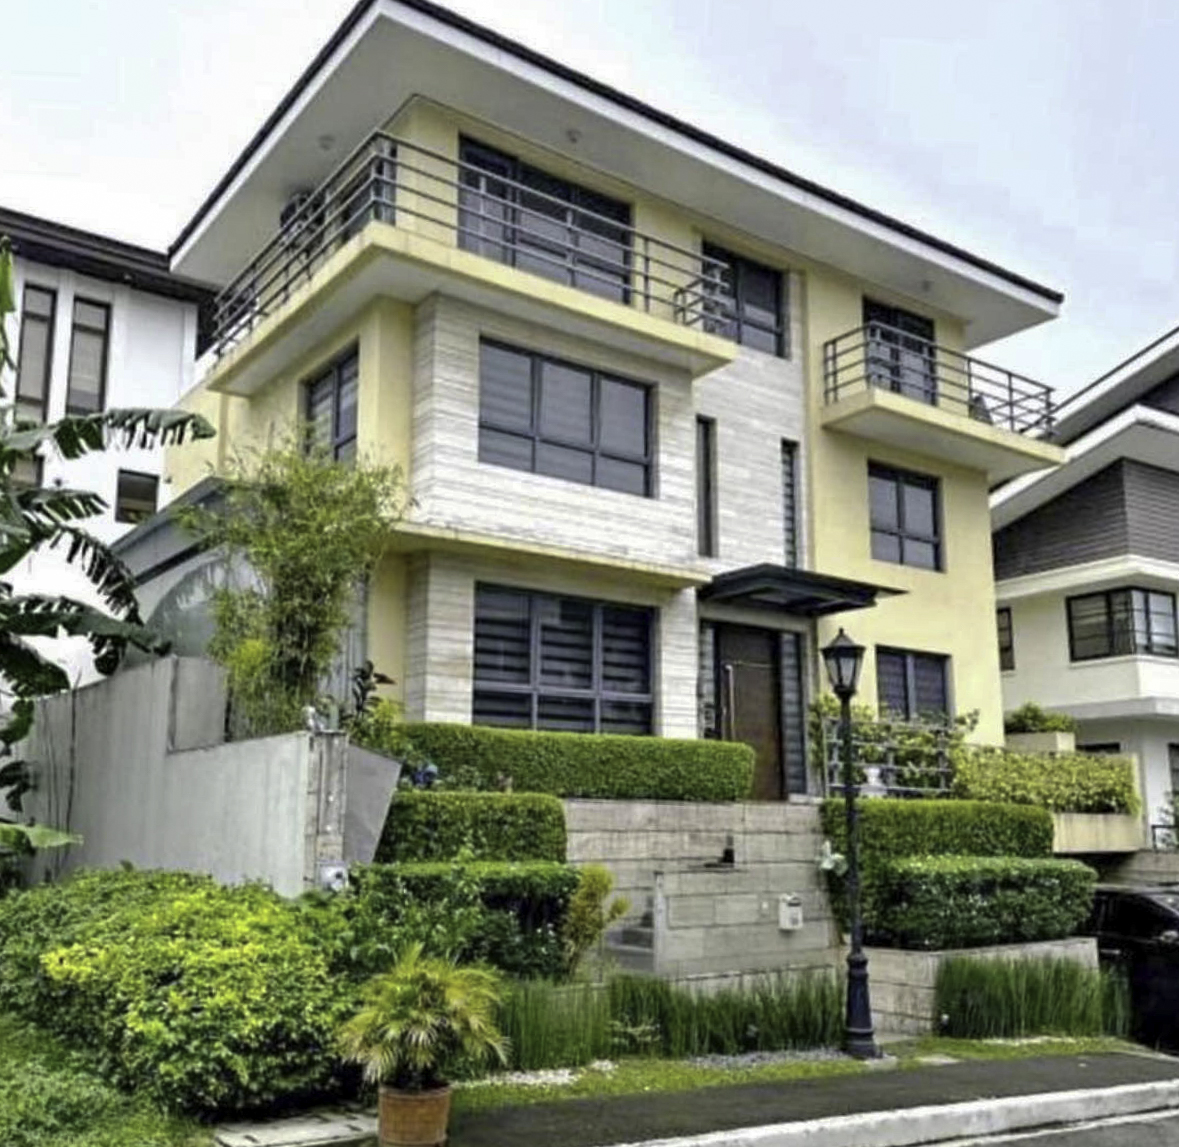 For Sale: 5BR House in Mckinley Hill Village, Taguig City